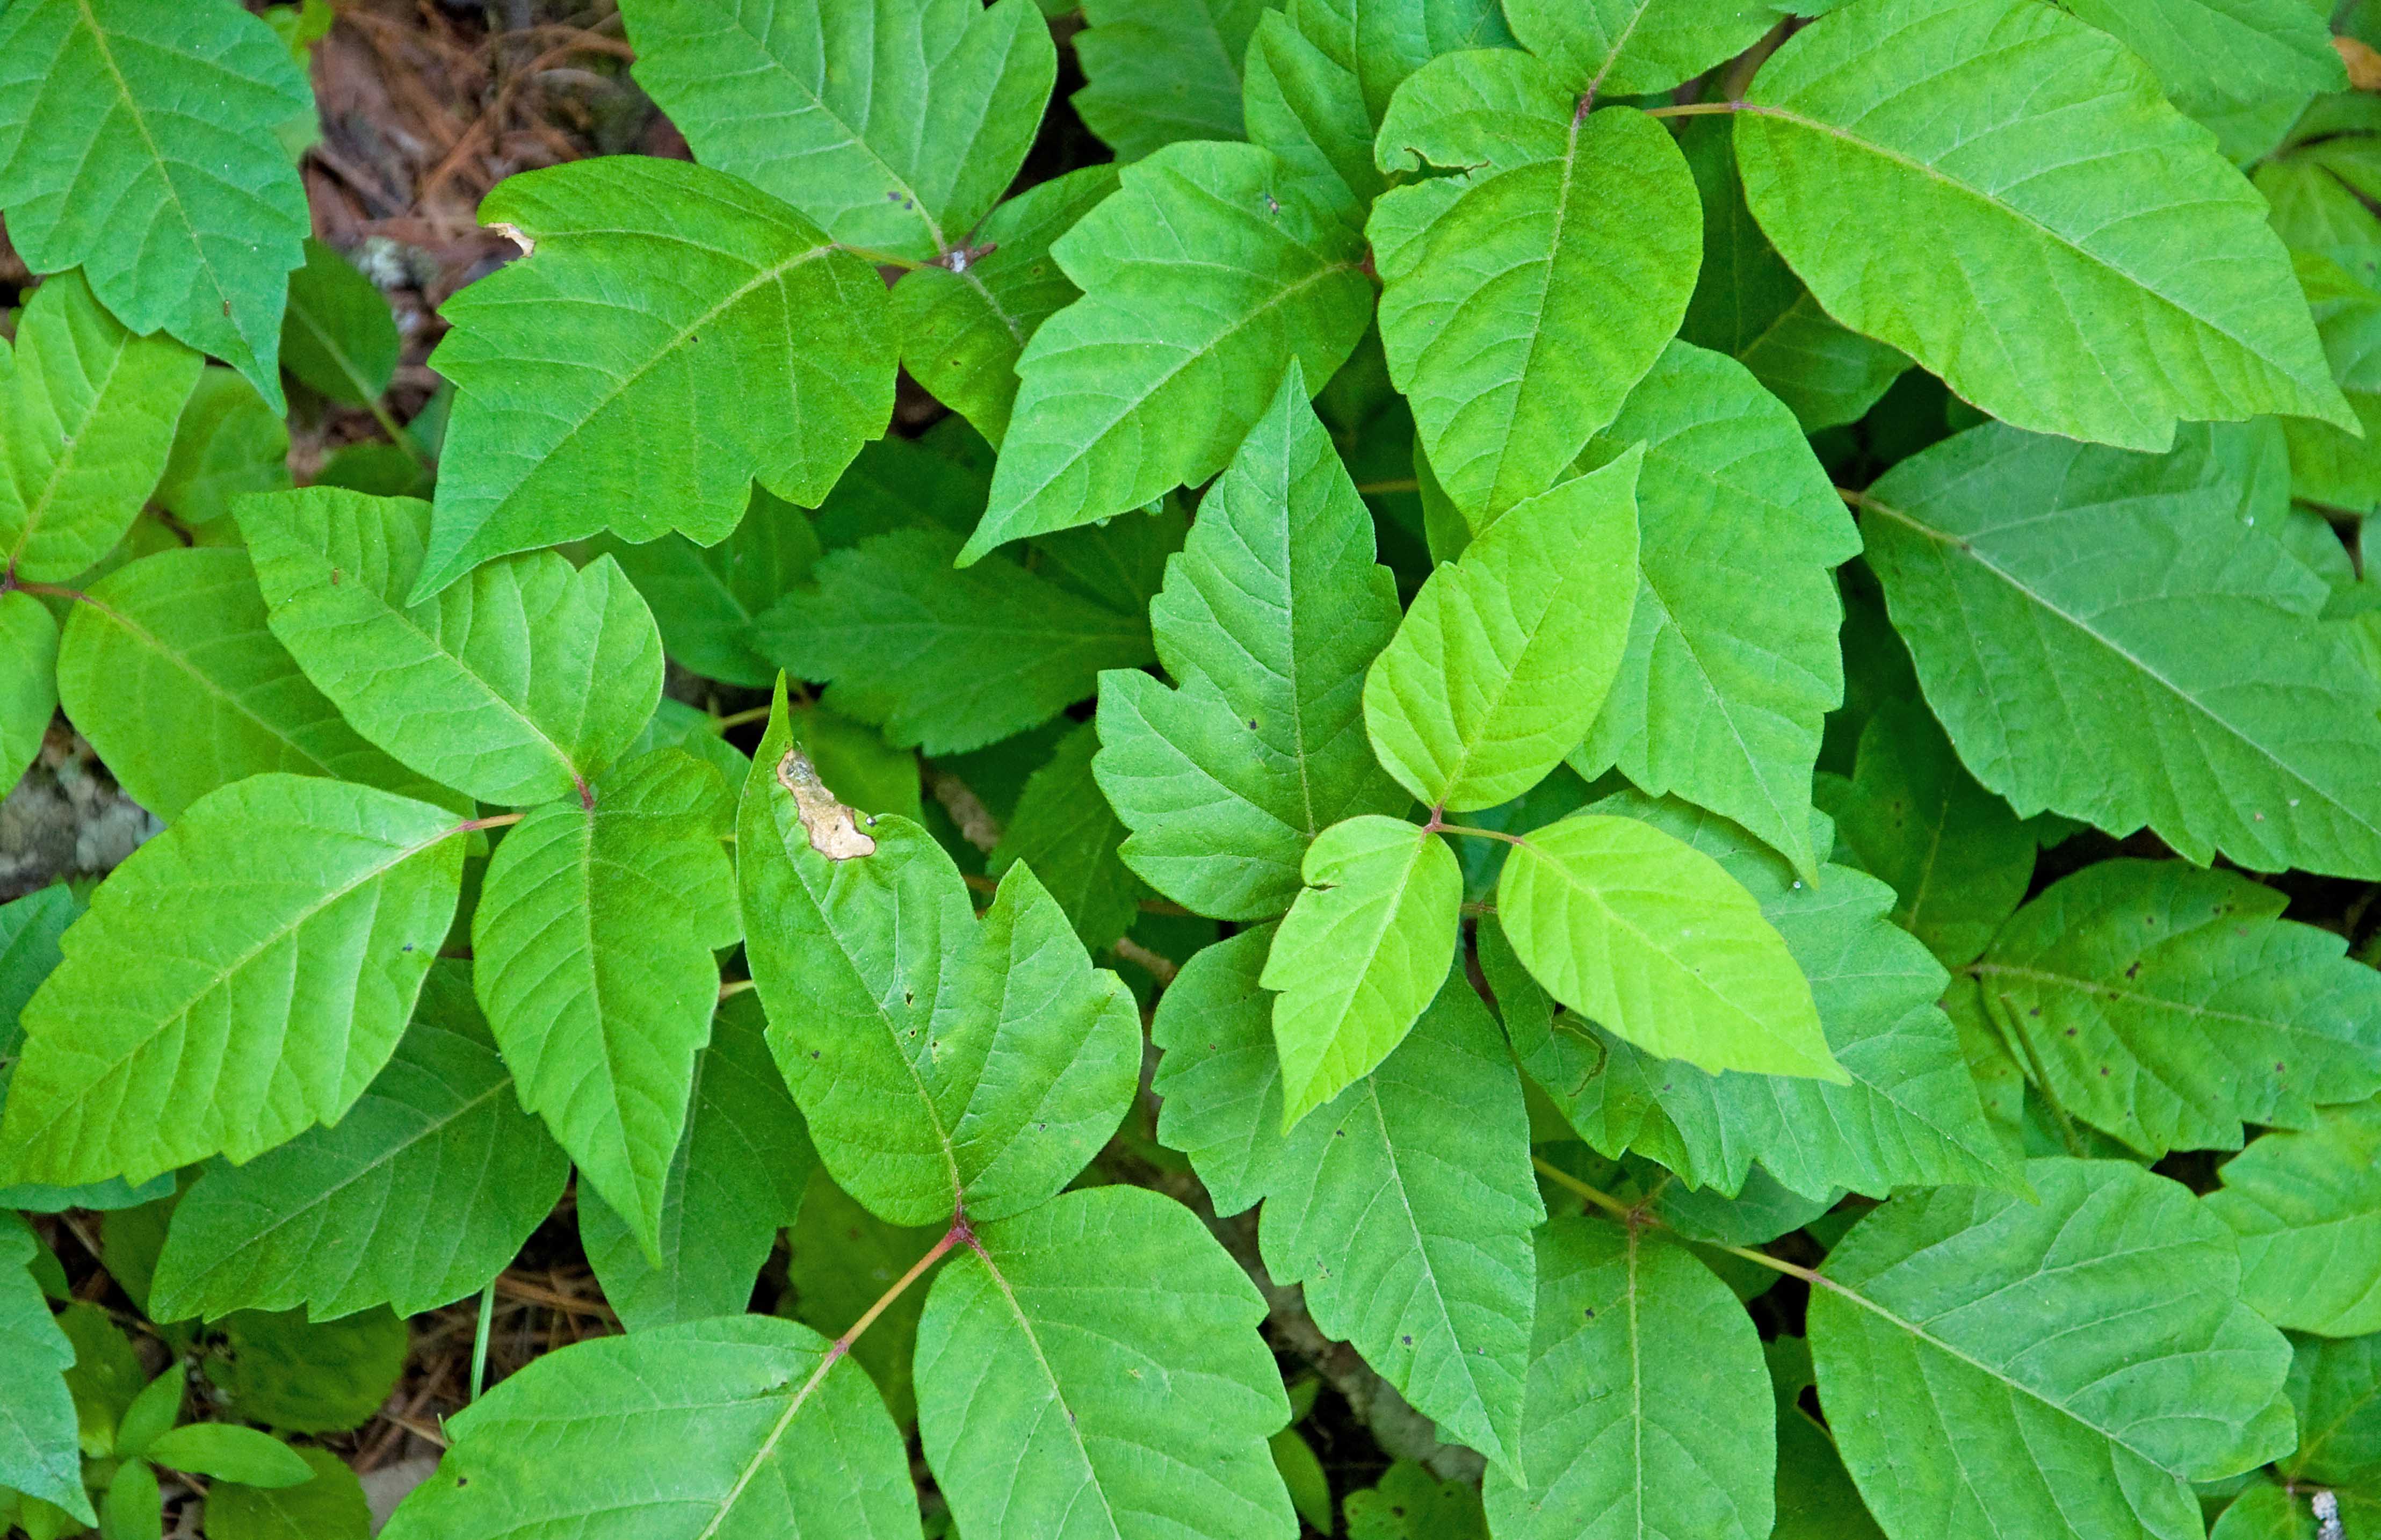 Does Having Poison Ivy Affect Baby Development?